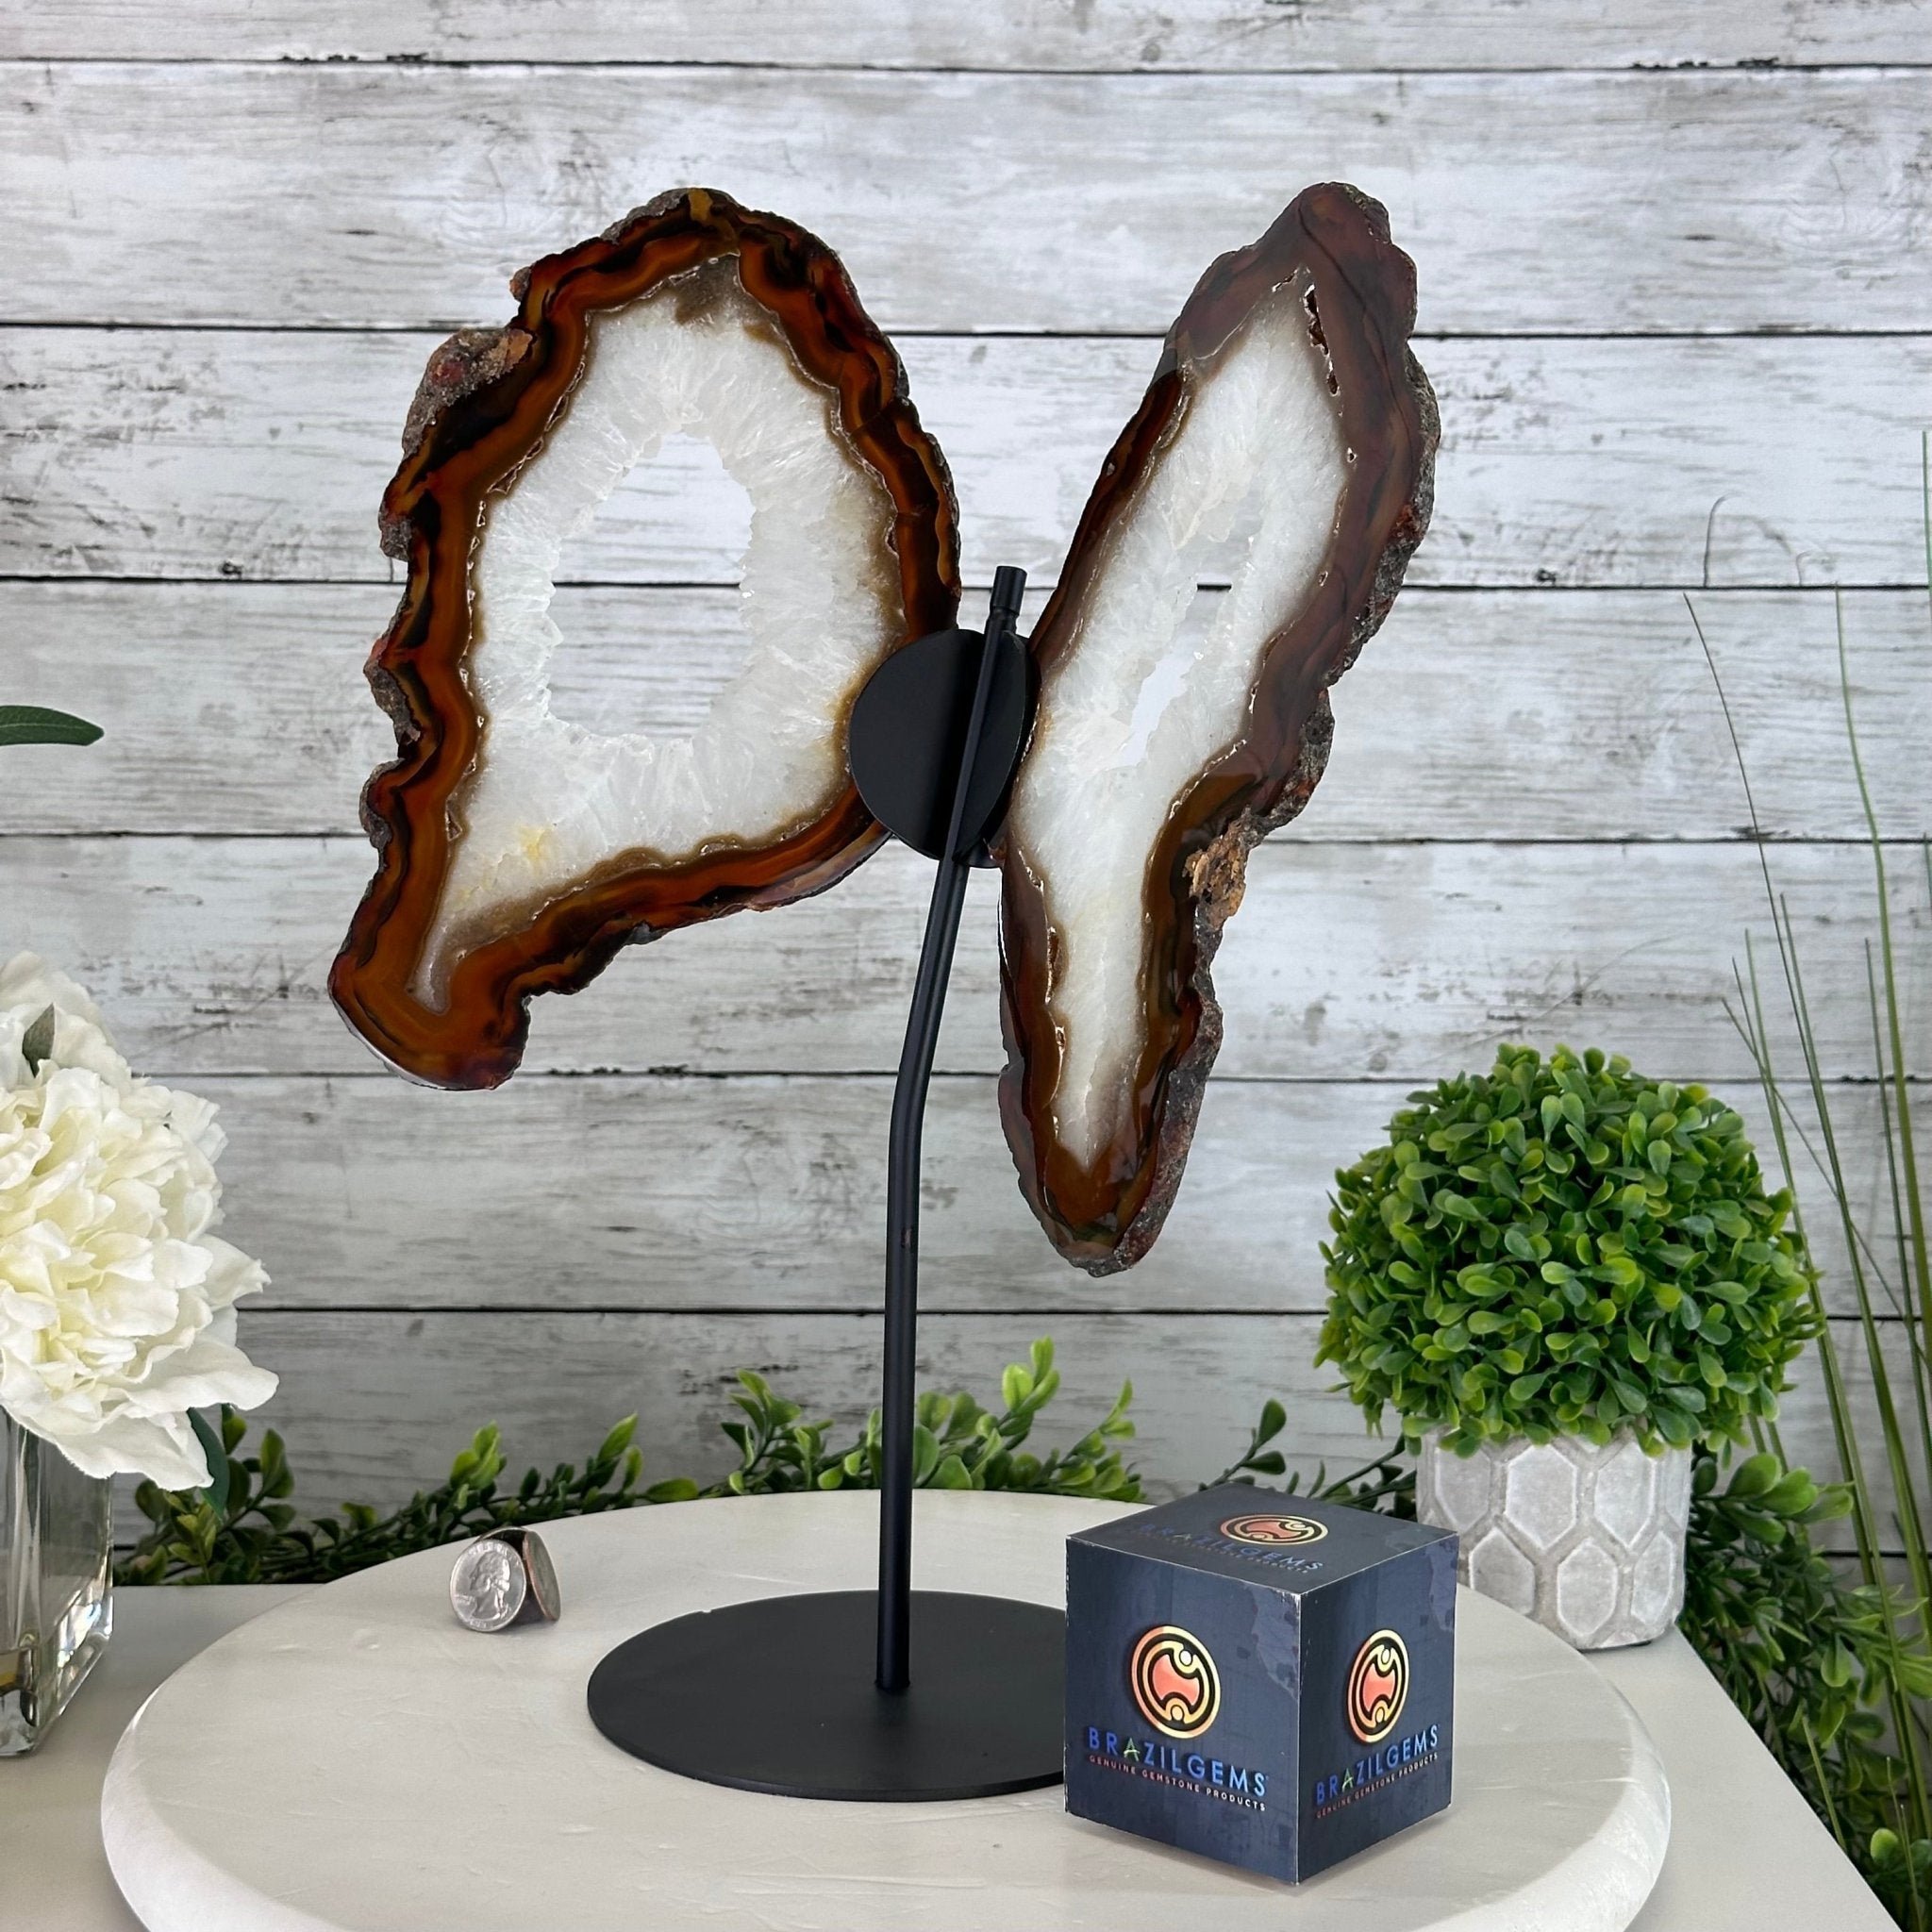 Natural Brazilian Agate "Butterfly Wings", 15" Tall #5050NA-086 - Brazil GemsBrazil GemsNatural Brazilian Agate "Butterfly Wings", 15" Tall #5050NA-086Agate Butterfly Wings5050NA-086